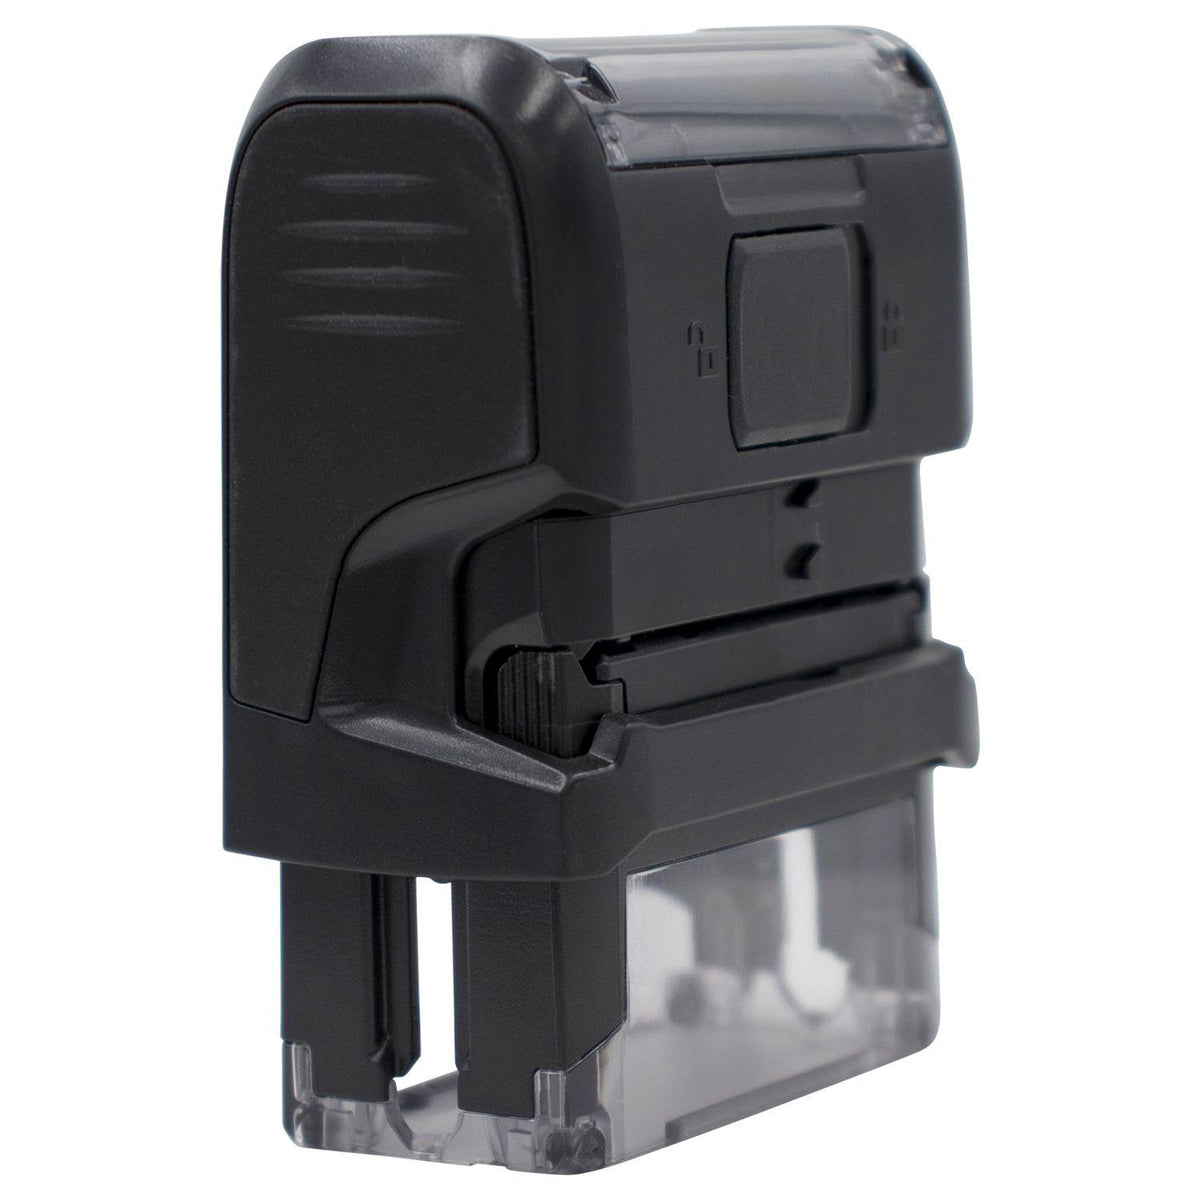 Self Inking Community Property Stamp - Engineer Seal Stamps - Brand_Trodat, Impression Size_Small, Stamp Type_Self-Inking Stamp, Type of Use_Professional